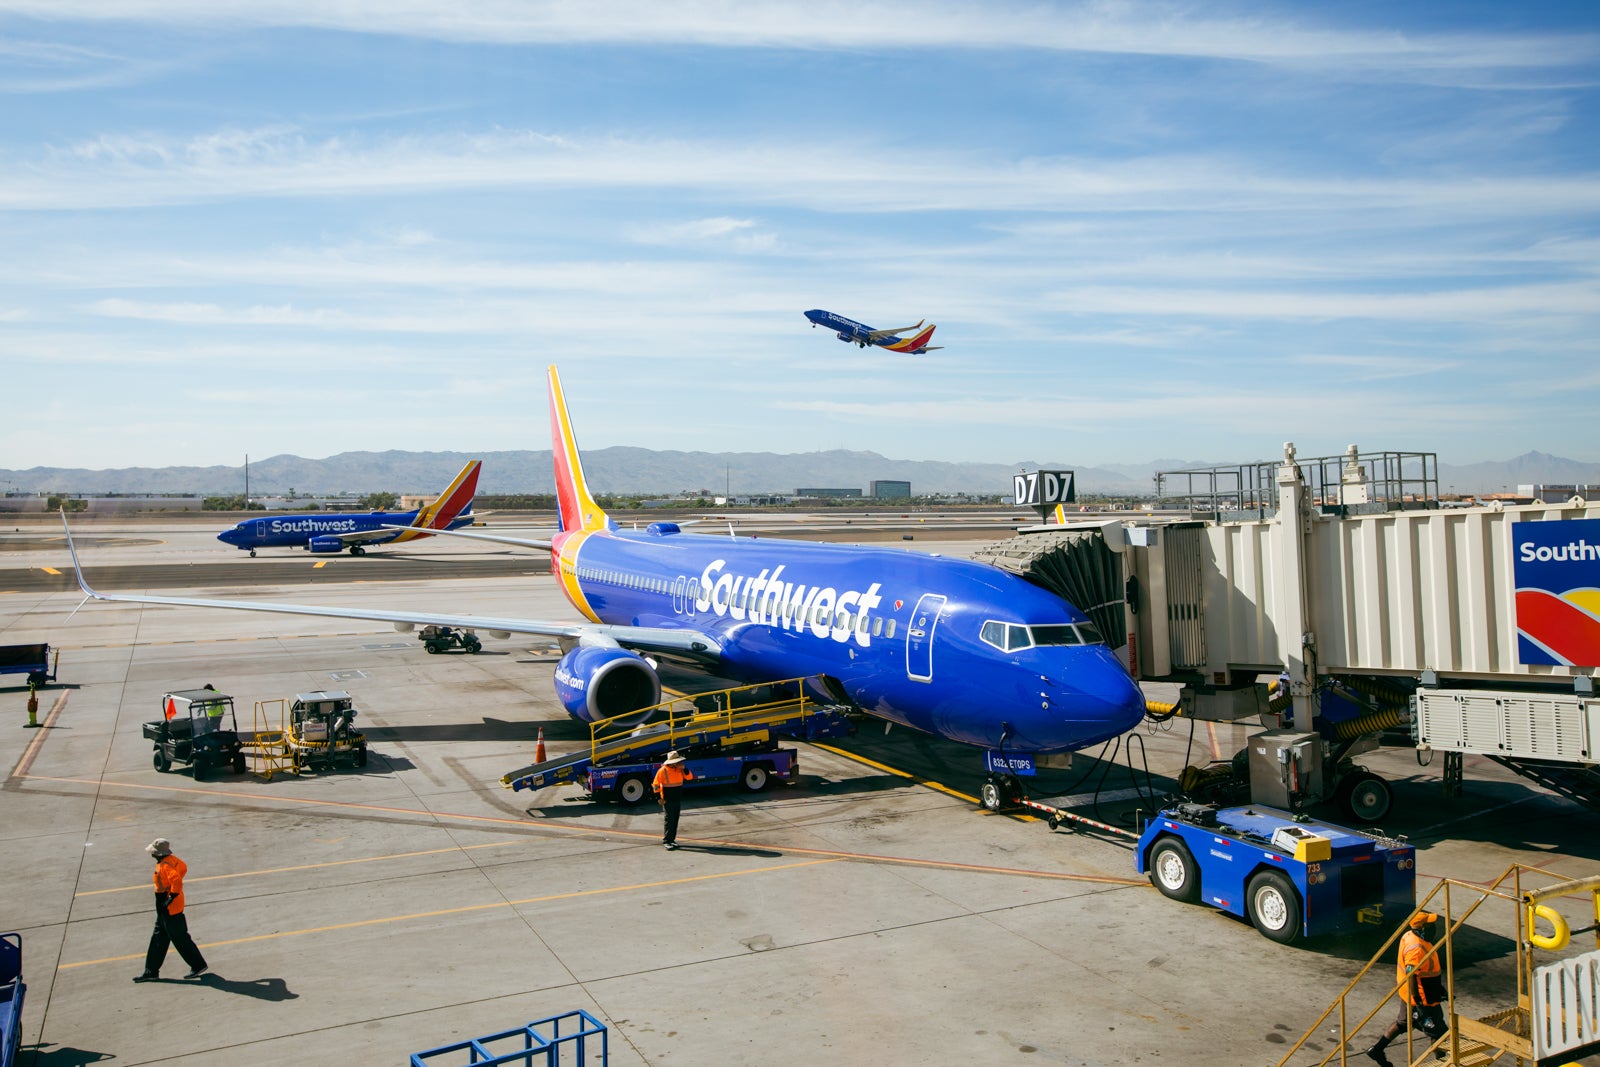 Southwest’s Recent Weekend Performance and Continued Customer